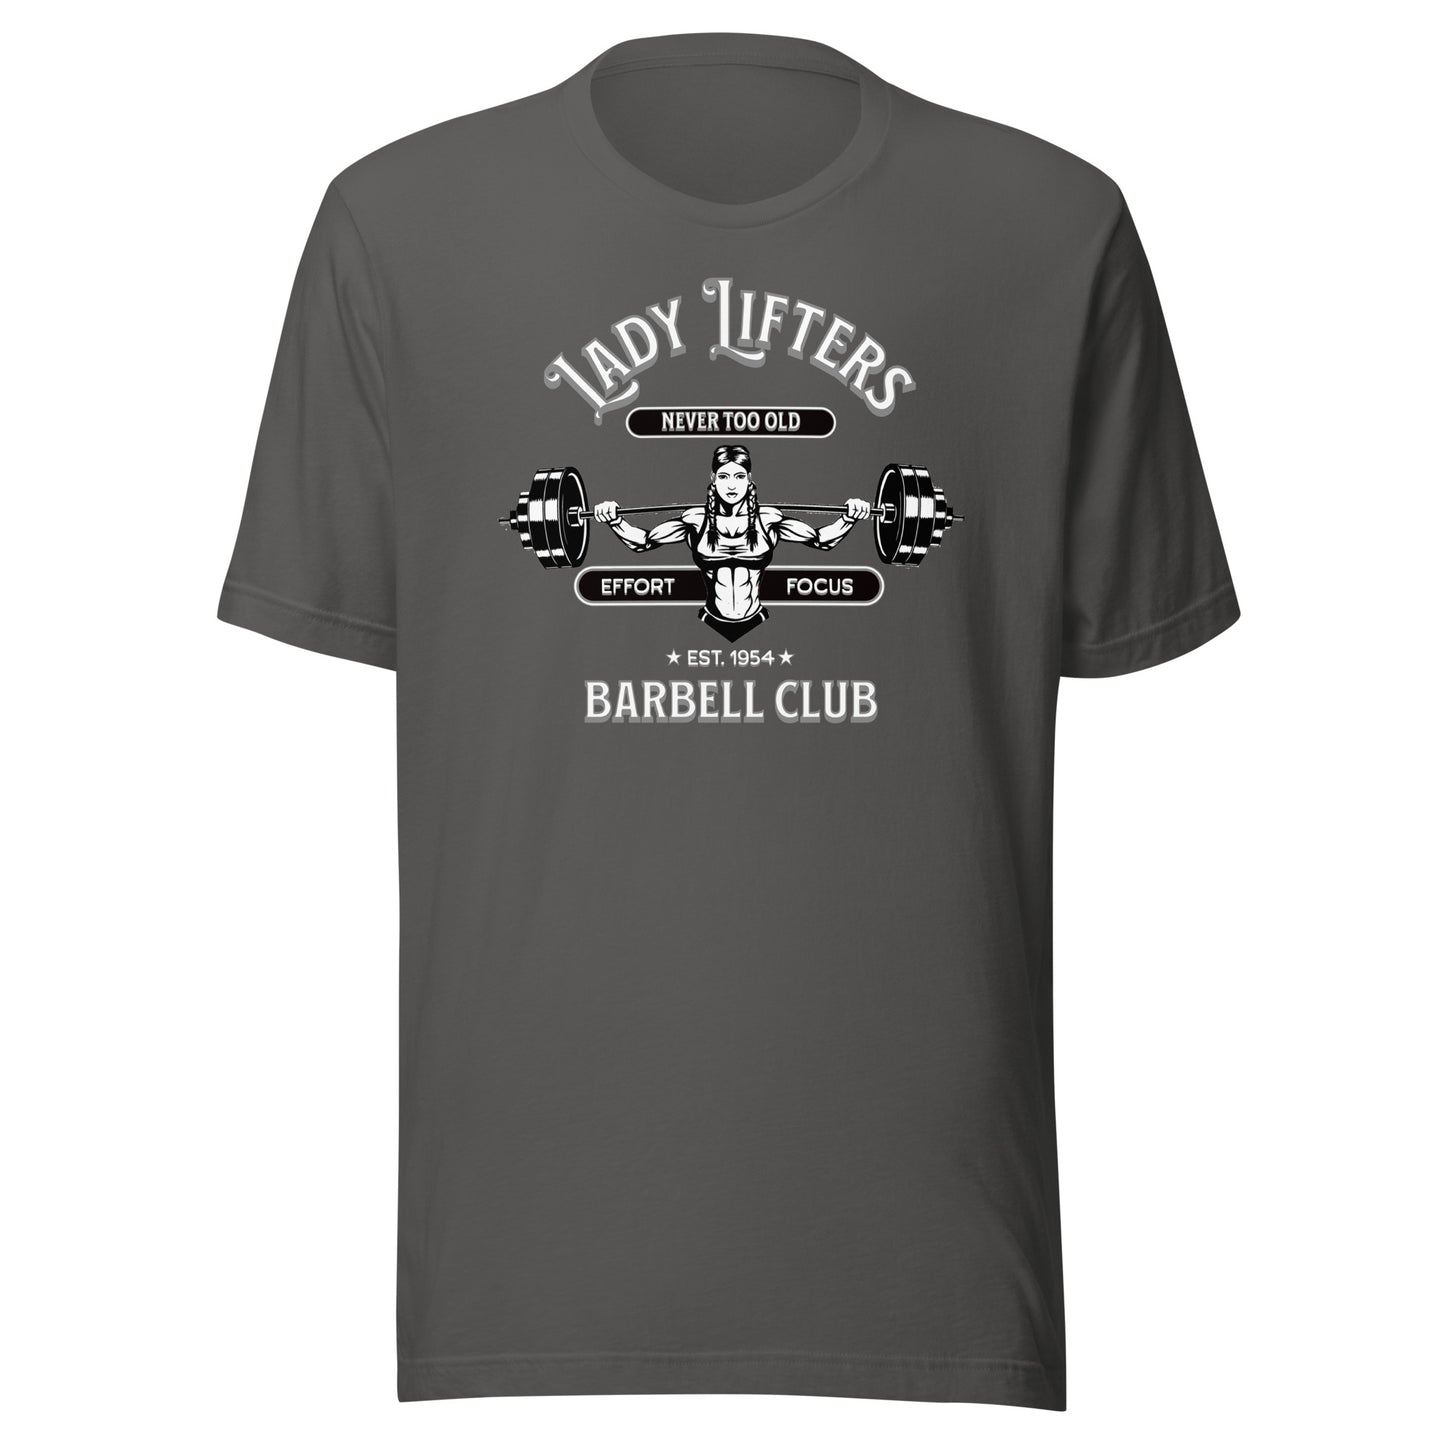 Lady Lifters Barbell Club Unisex t-shirt